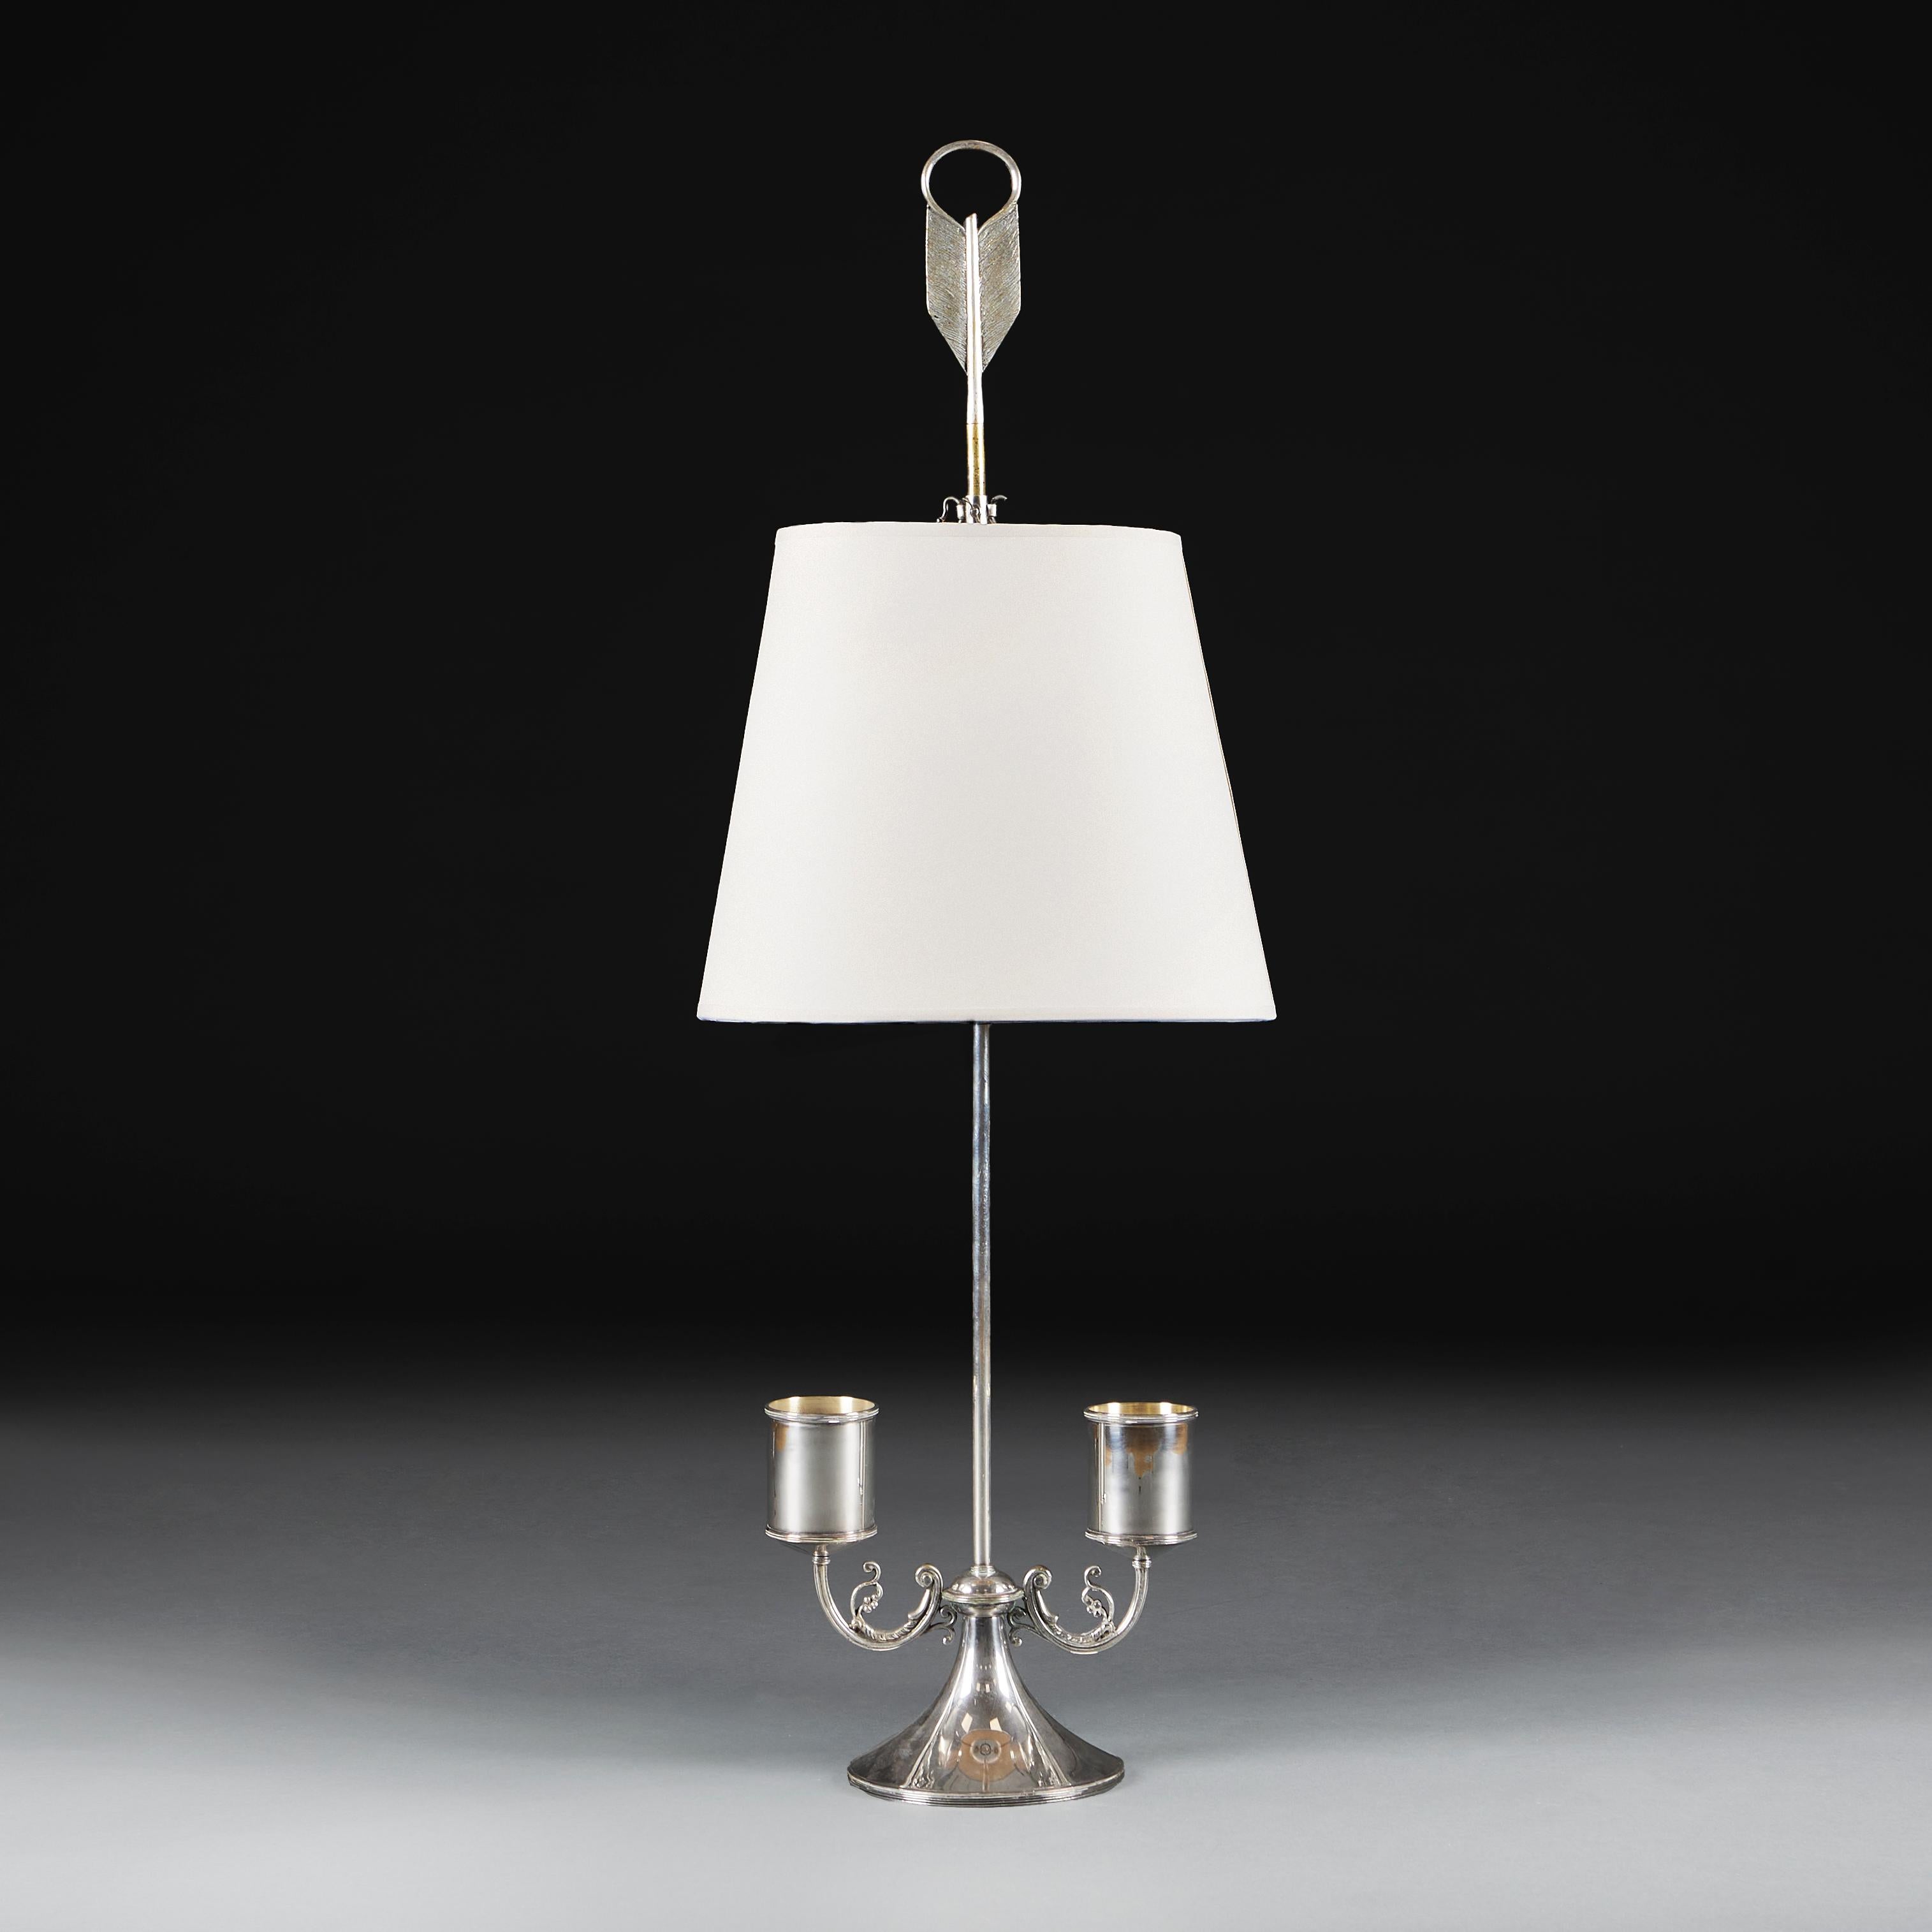 A fine silver bouillotte lamp of large scale, with loop and arrow top, with adjustable shade height, supported on a pedestal base with scrolling arms. Stamped Avanti. 

Avanti was founded in 1929 and became a major part of the Italian design